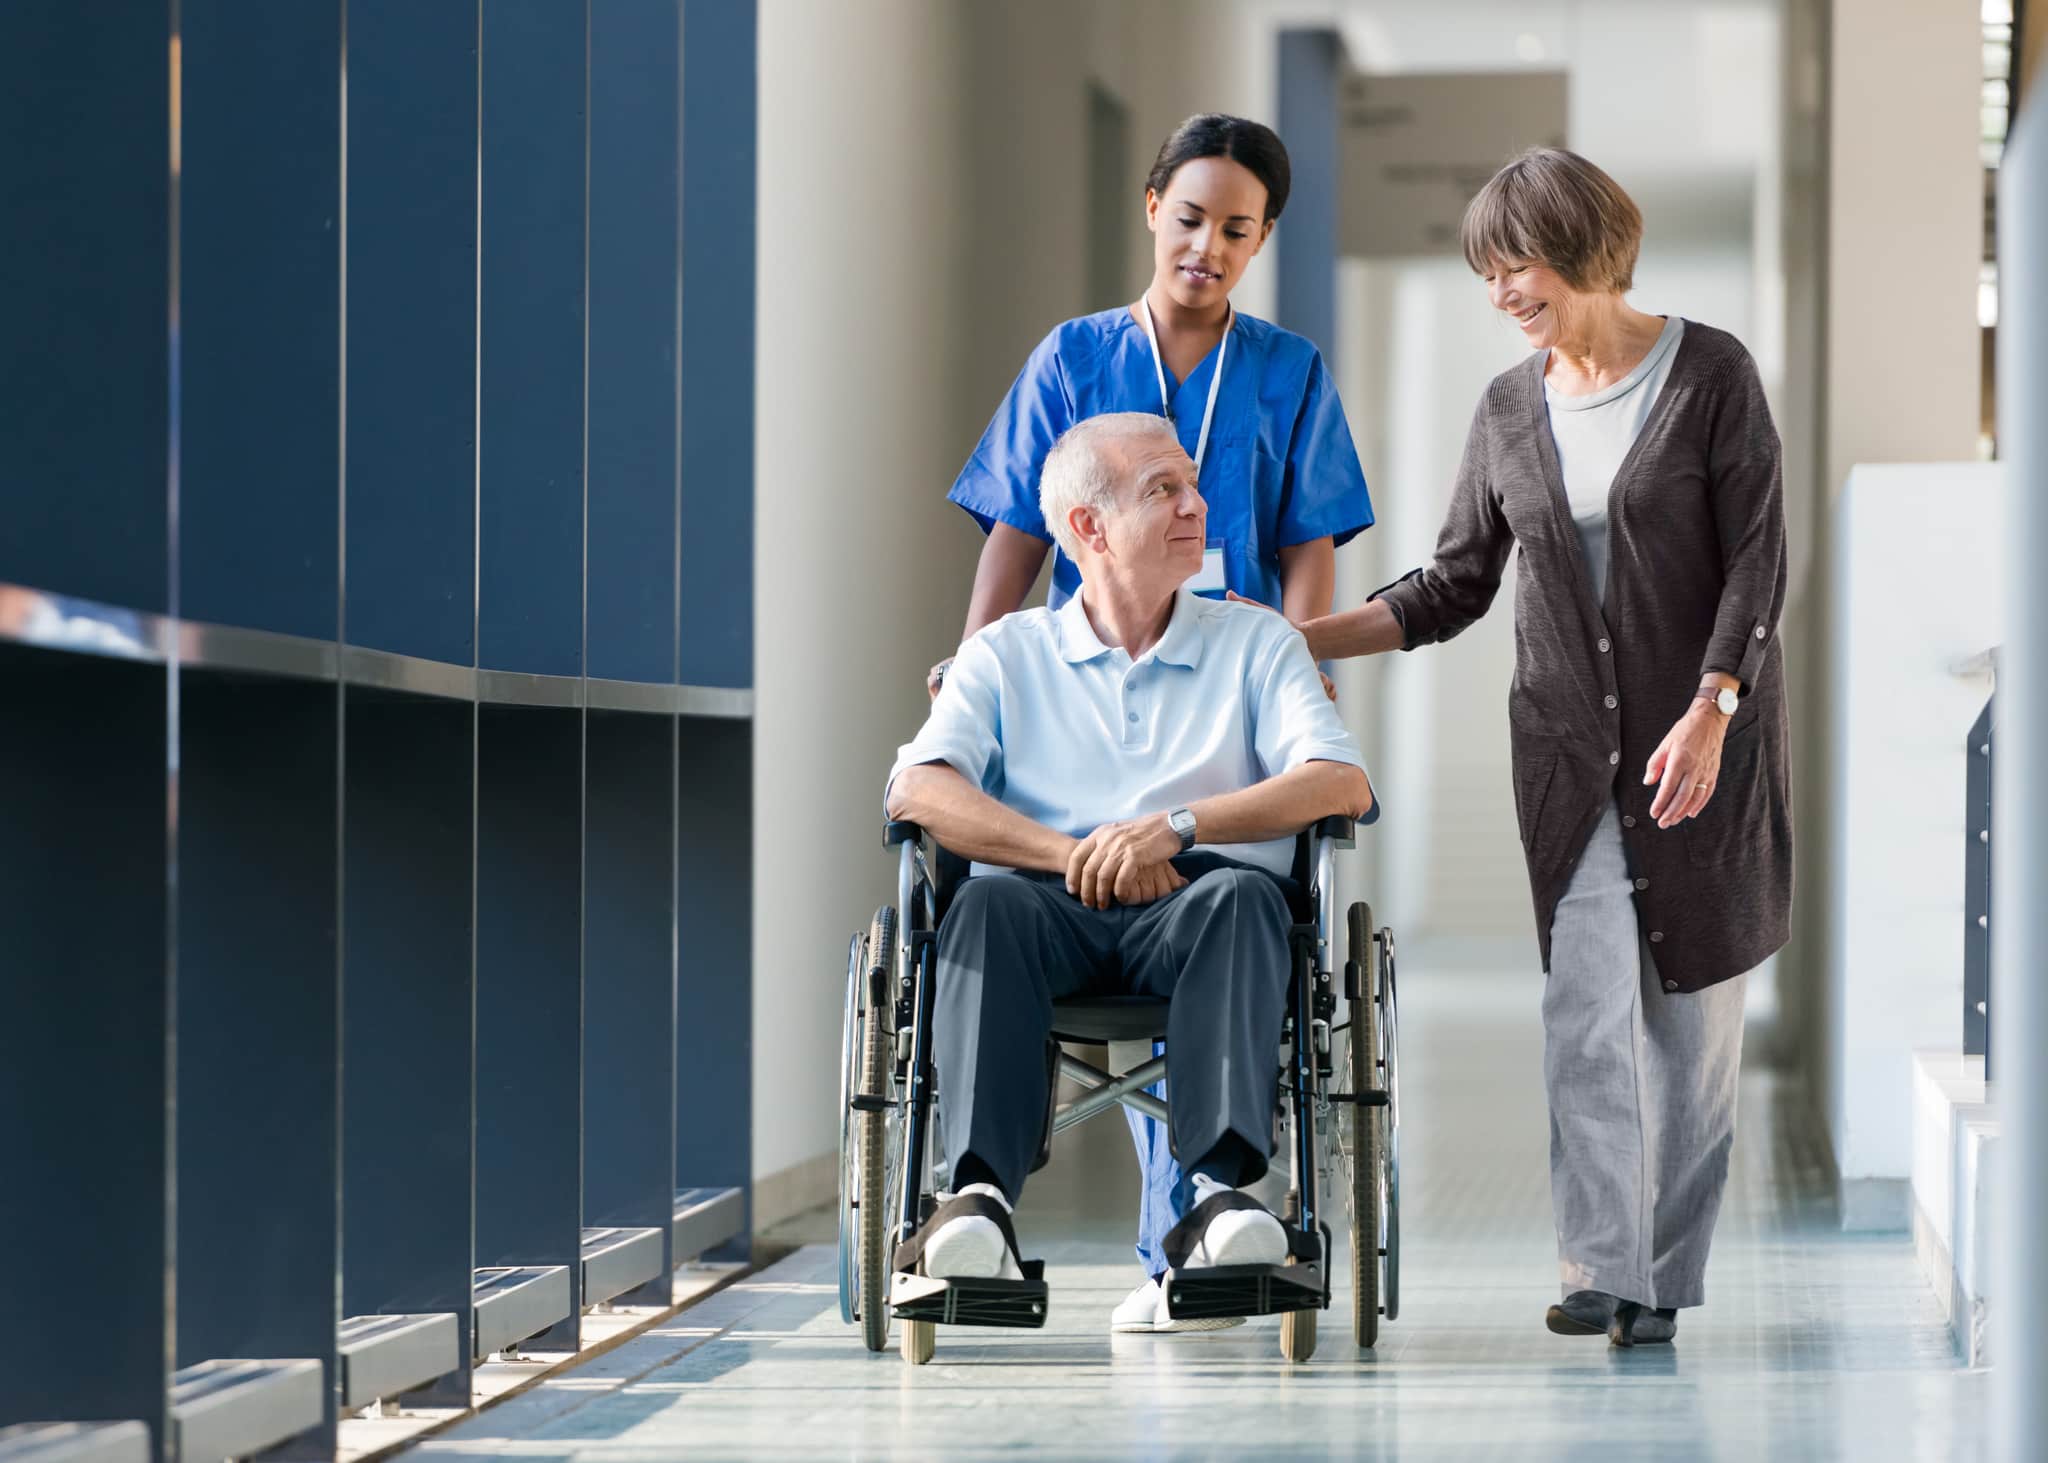 A nurse in blue scrubs pushes an elderly man in a wheelchair down a corridor as an older woman walks beside them, smiling and touching his shoulder. The setting appears to be a modern healthcare facility.